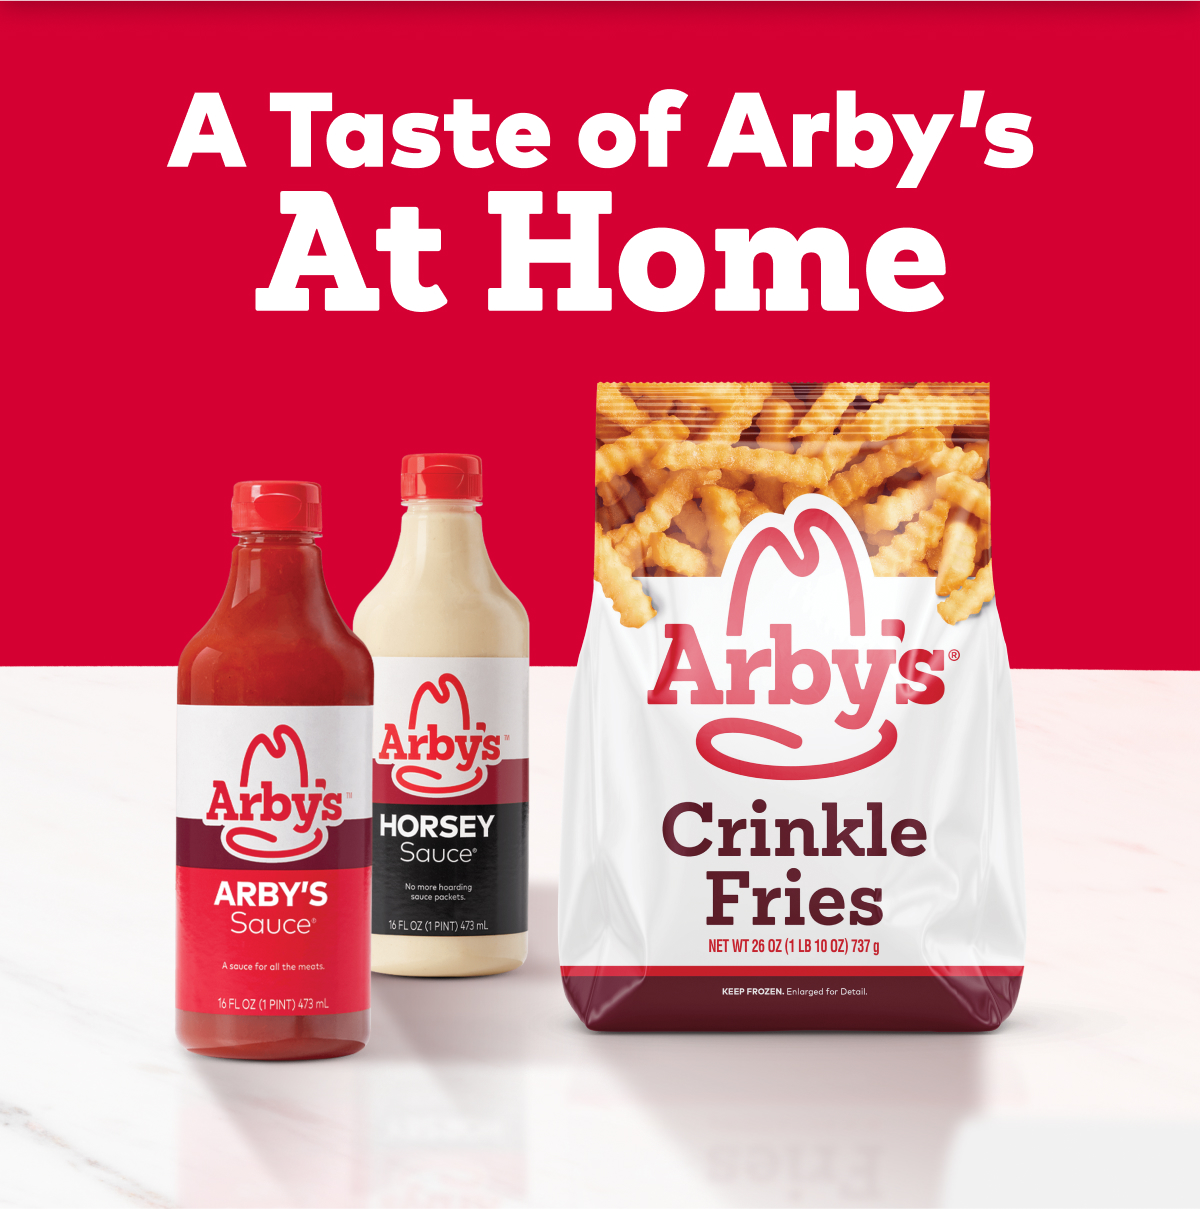 A Taste of Arby's At Home